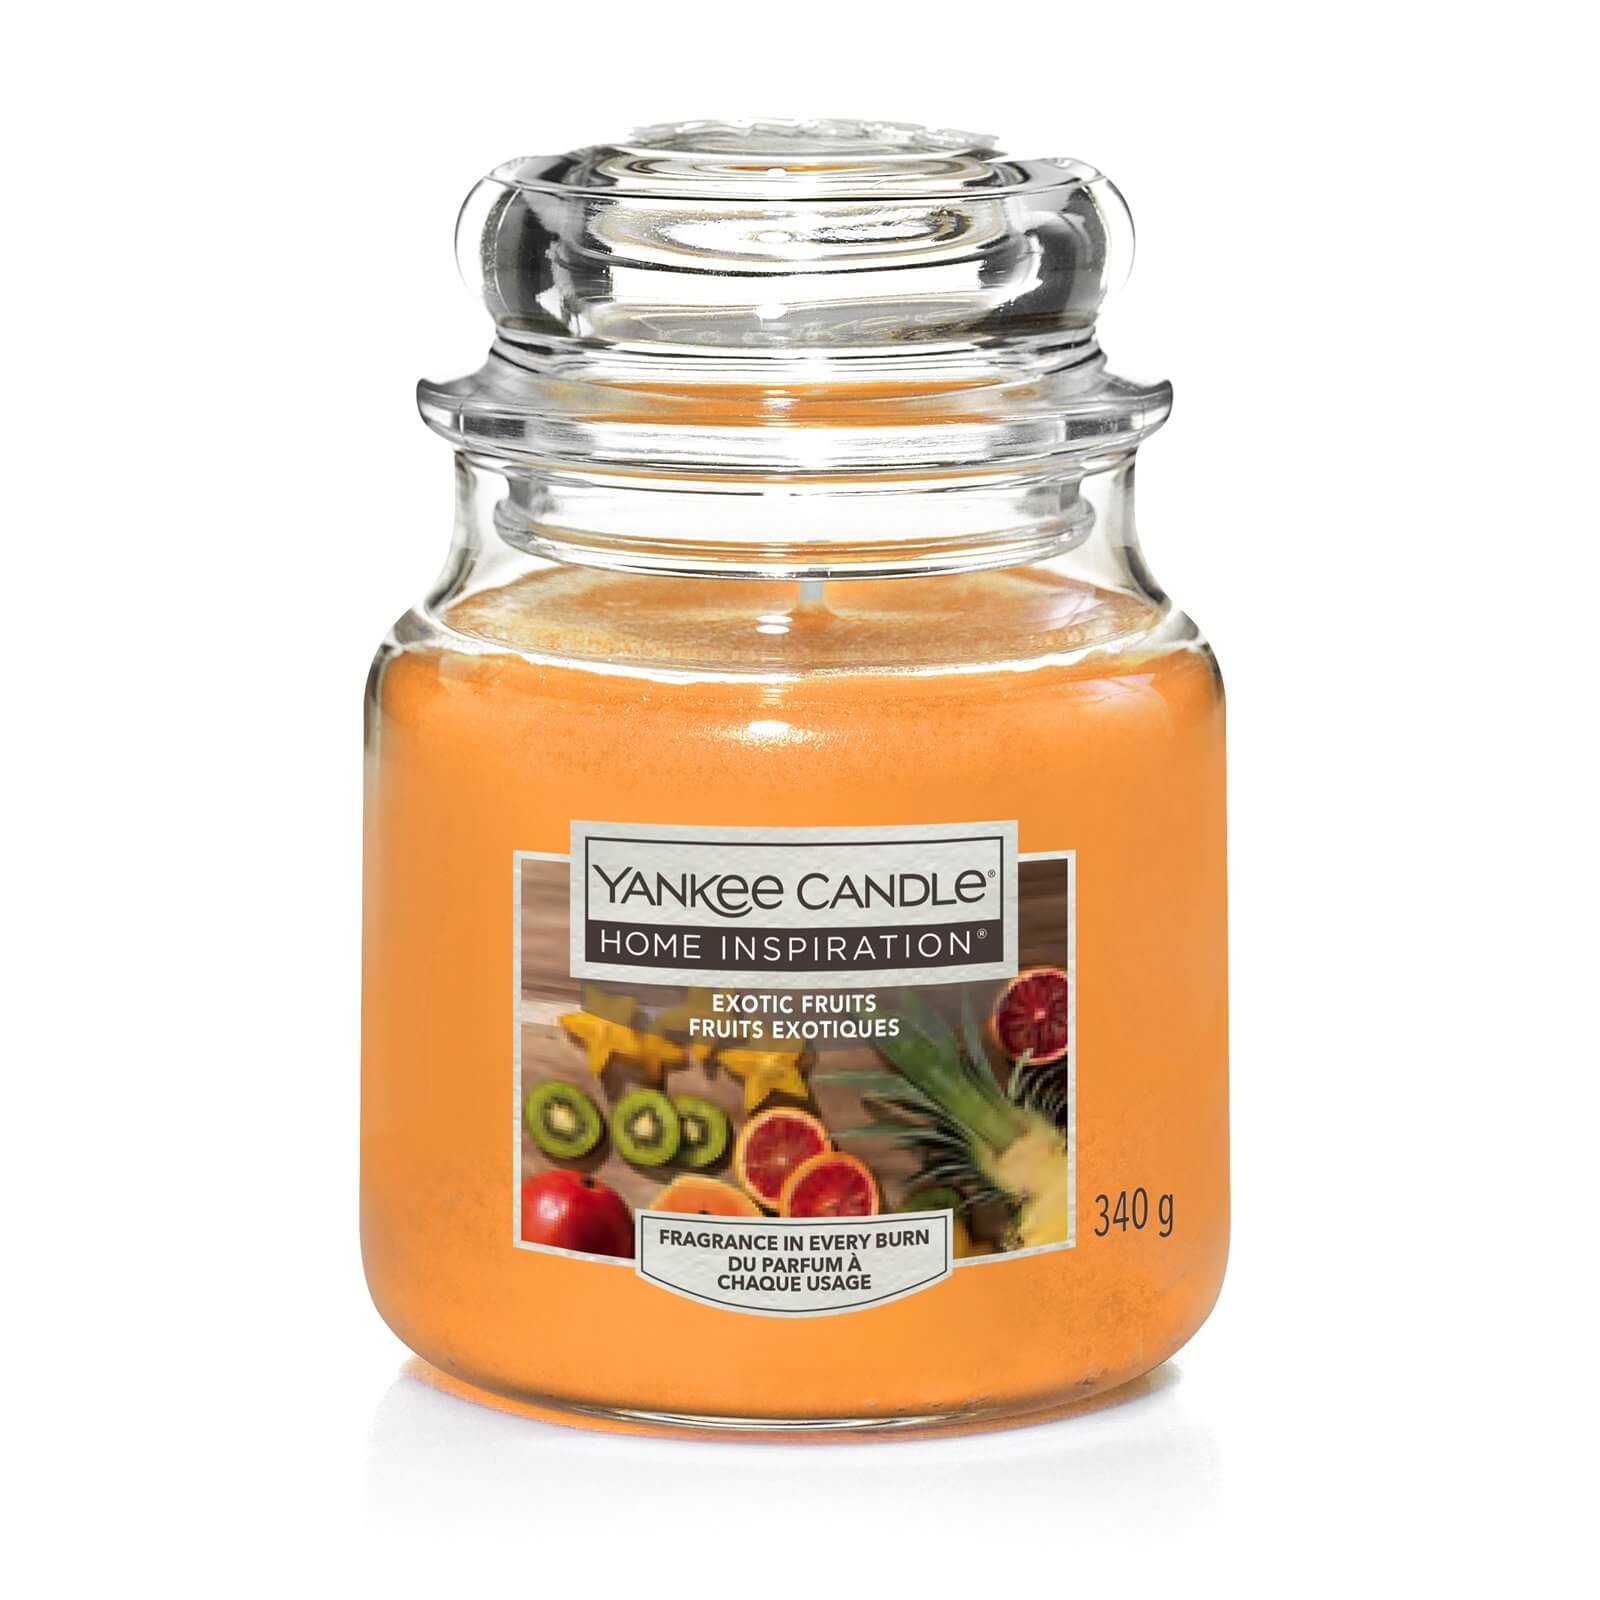 Yankee Candle Home Inspiration Scented Candle - Medium Jar - Exotic Fruits